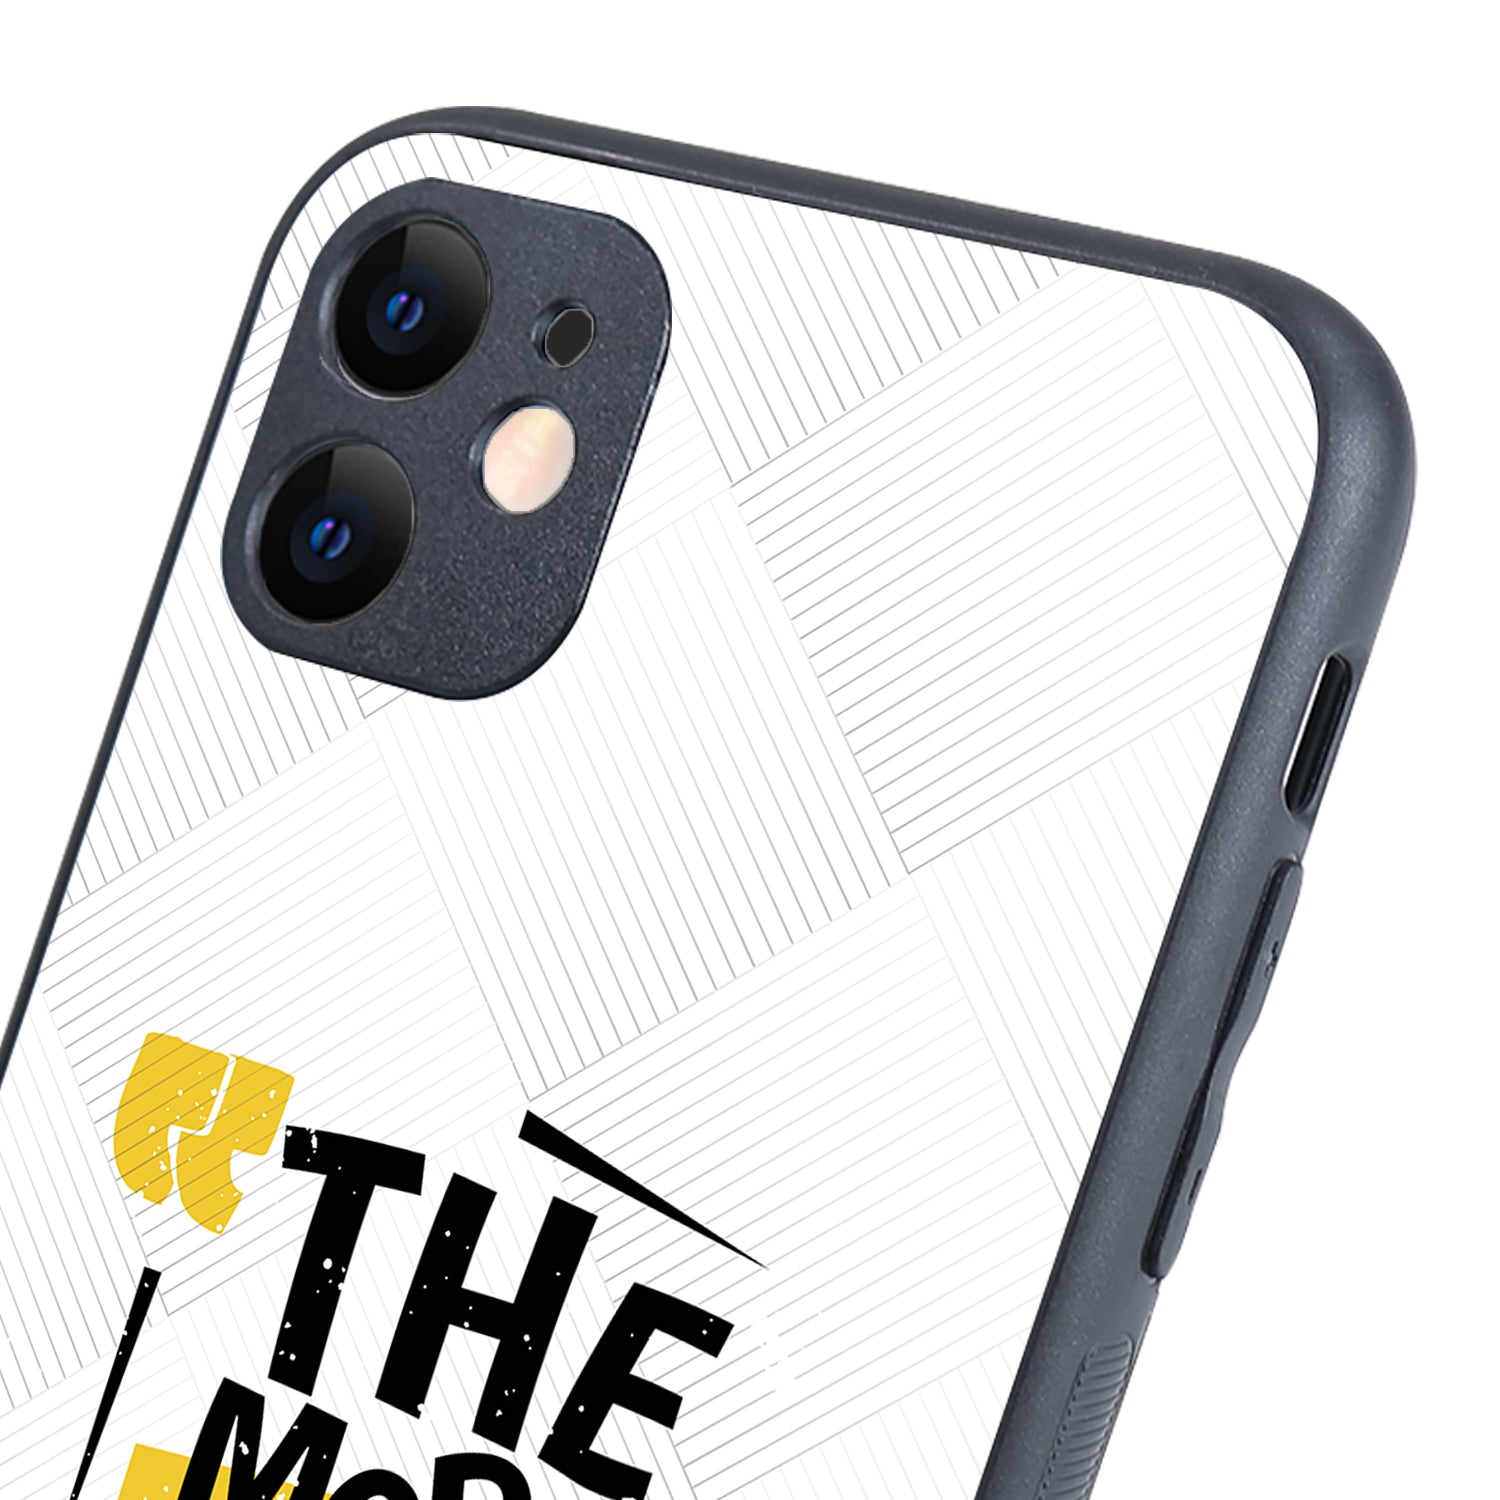 The More You Earn Quote iPhone 11 Case